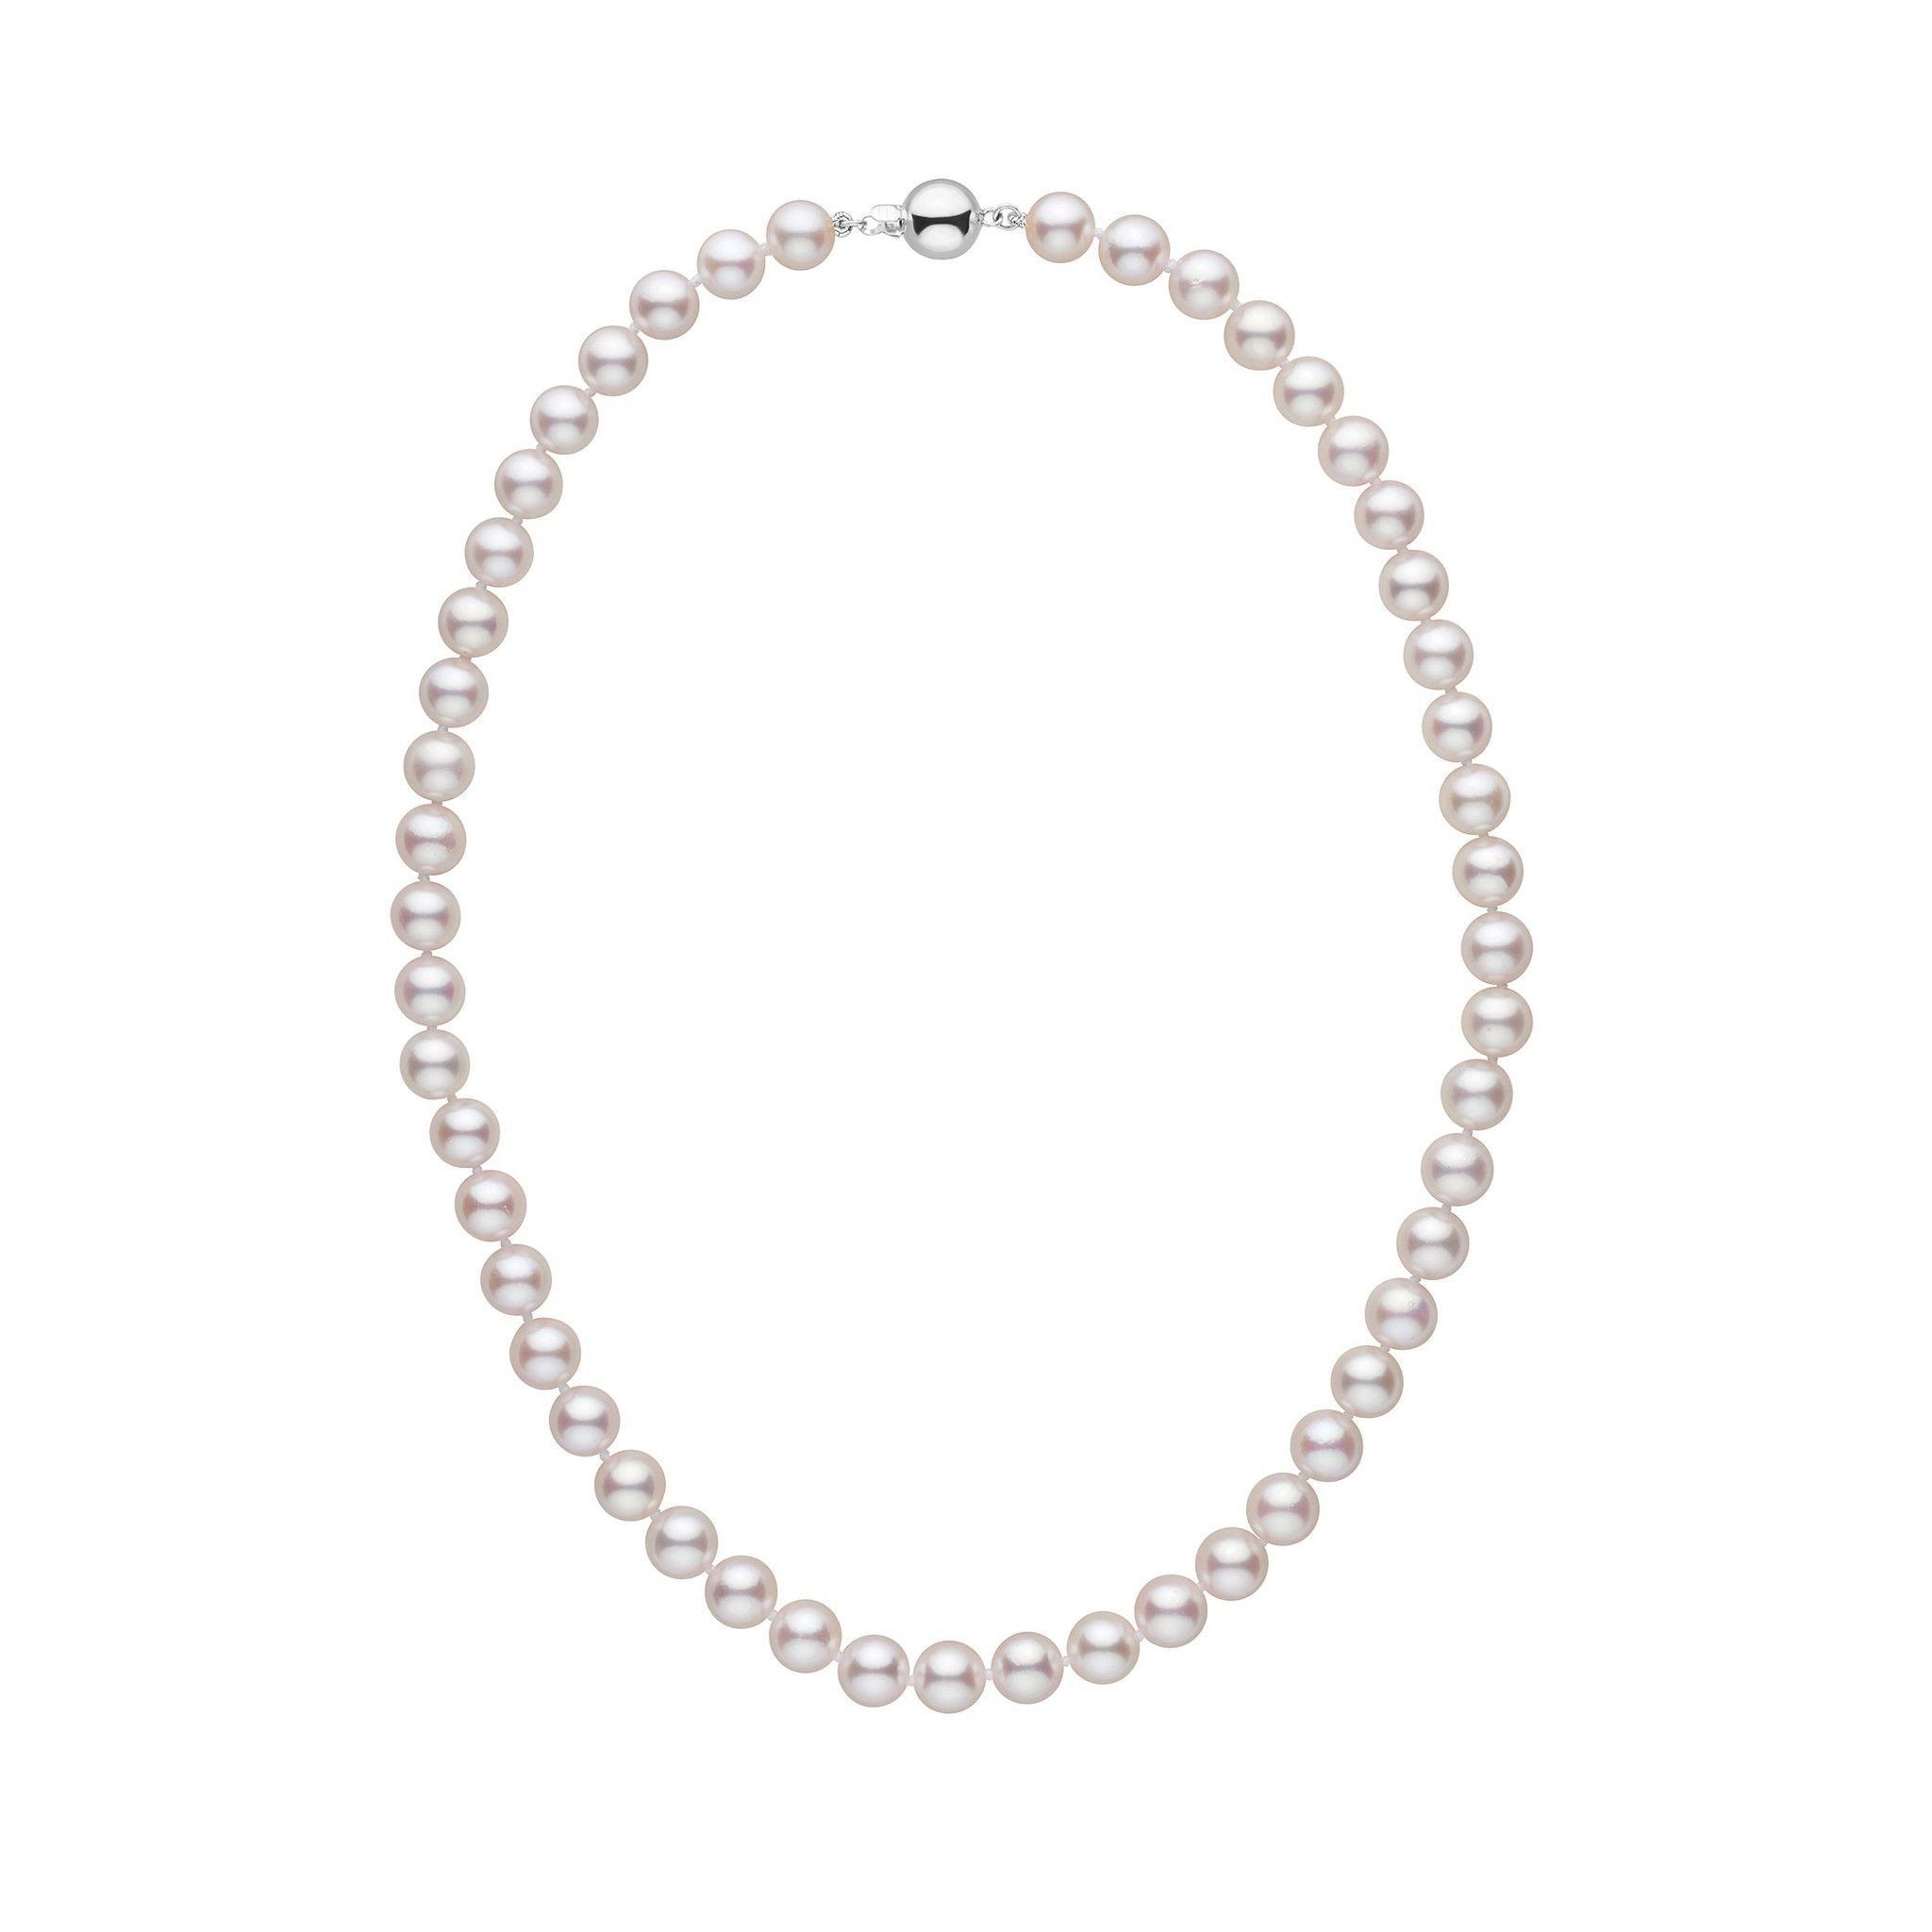 7.5-8.0 mm 16 inch AAA White Akoya Pearl Necklace White Gold